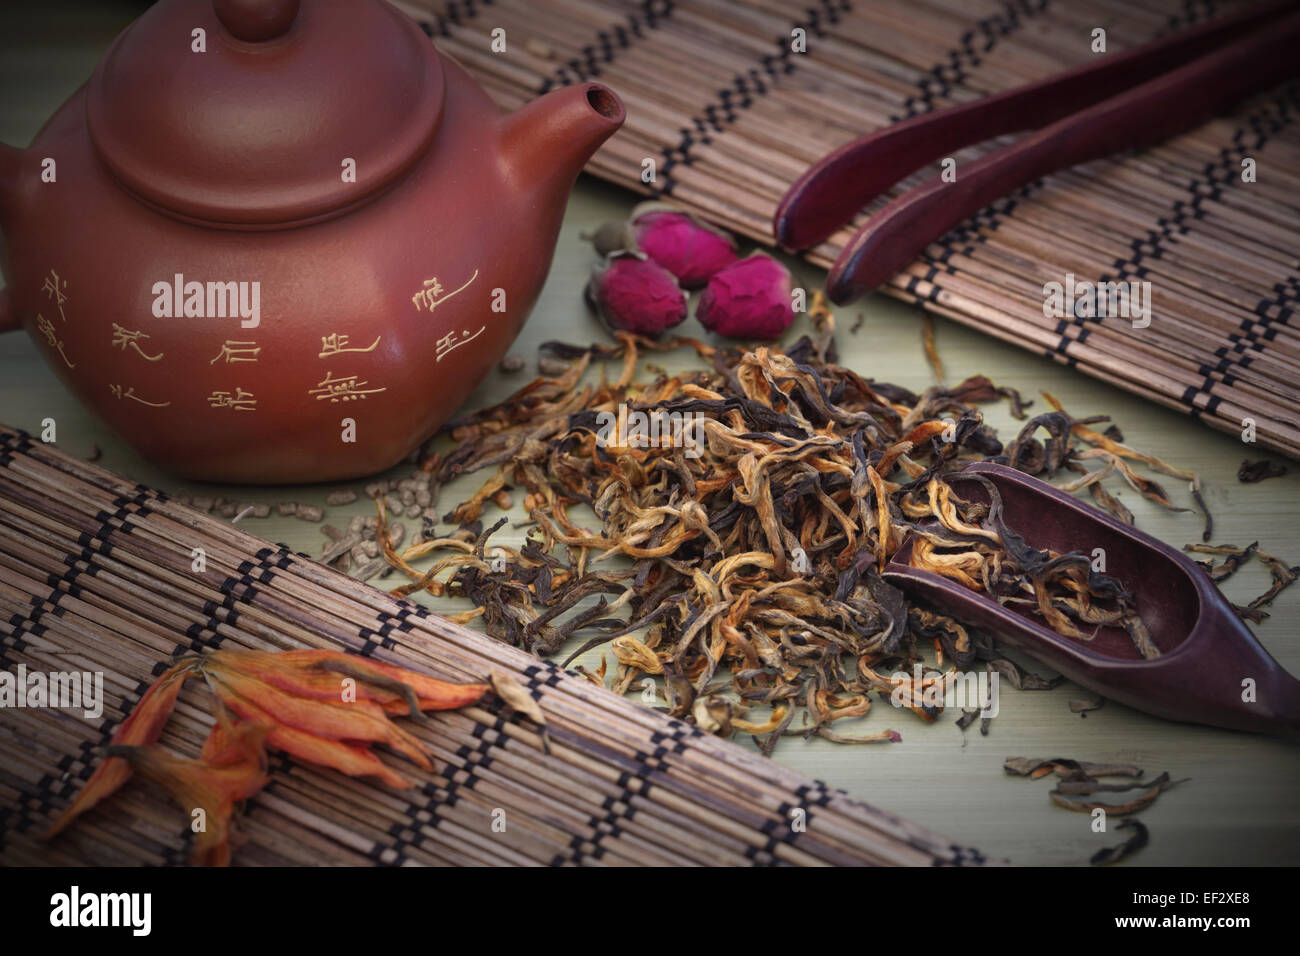 Dian Hong Mao Feng tea. Green tea leaves with clay teapot and wooden spoon on a tea table. Stock Photo